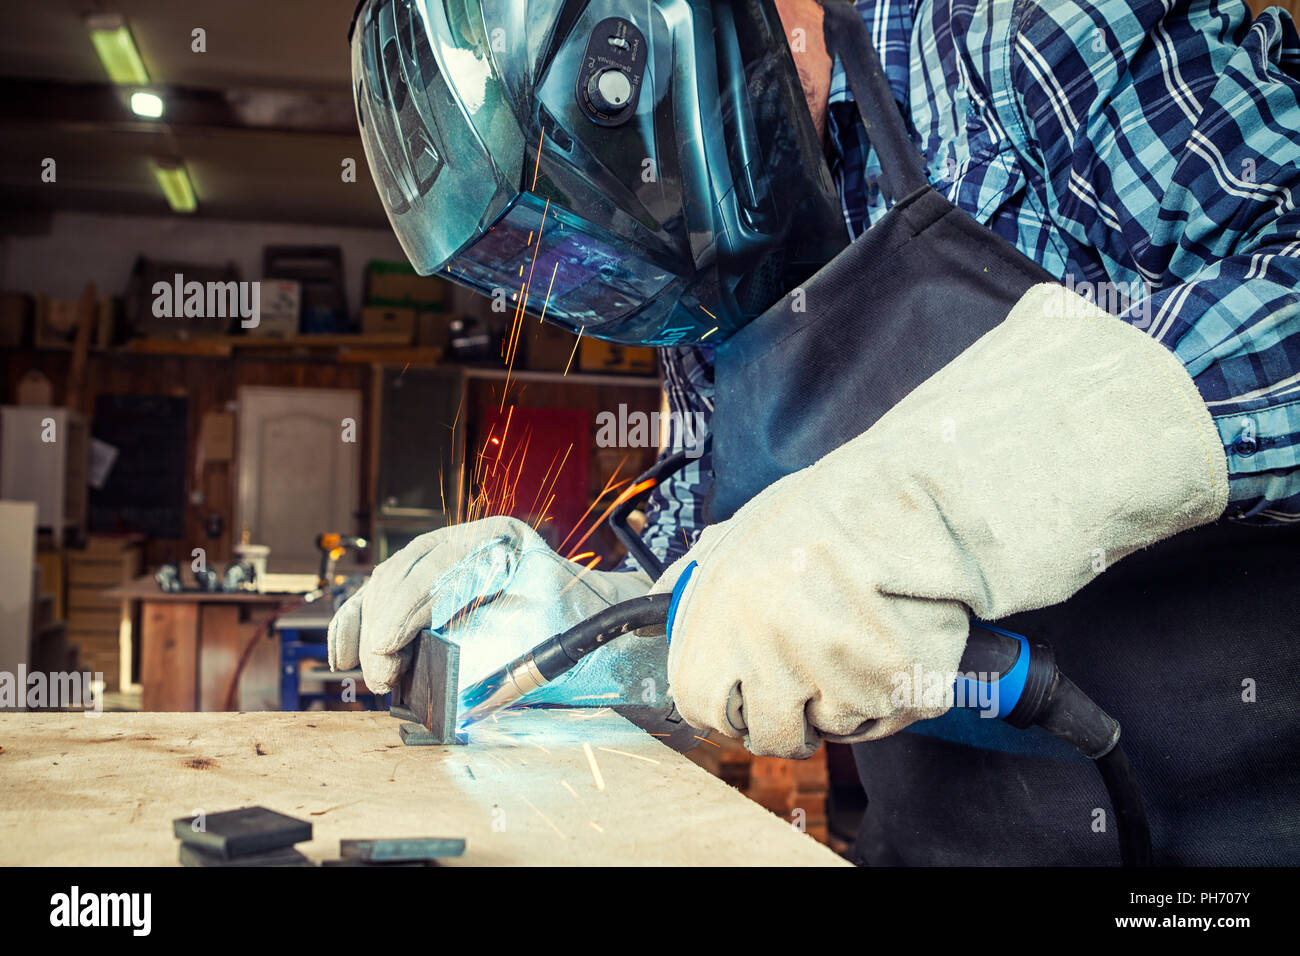 Close up of a young  man welder in  uniform, welding mask and welders leathers, weld  metal  with a arc welding machine  in workshop, blue and orange  Stock Photo